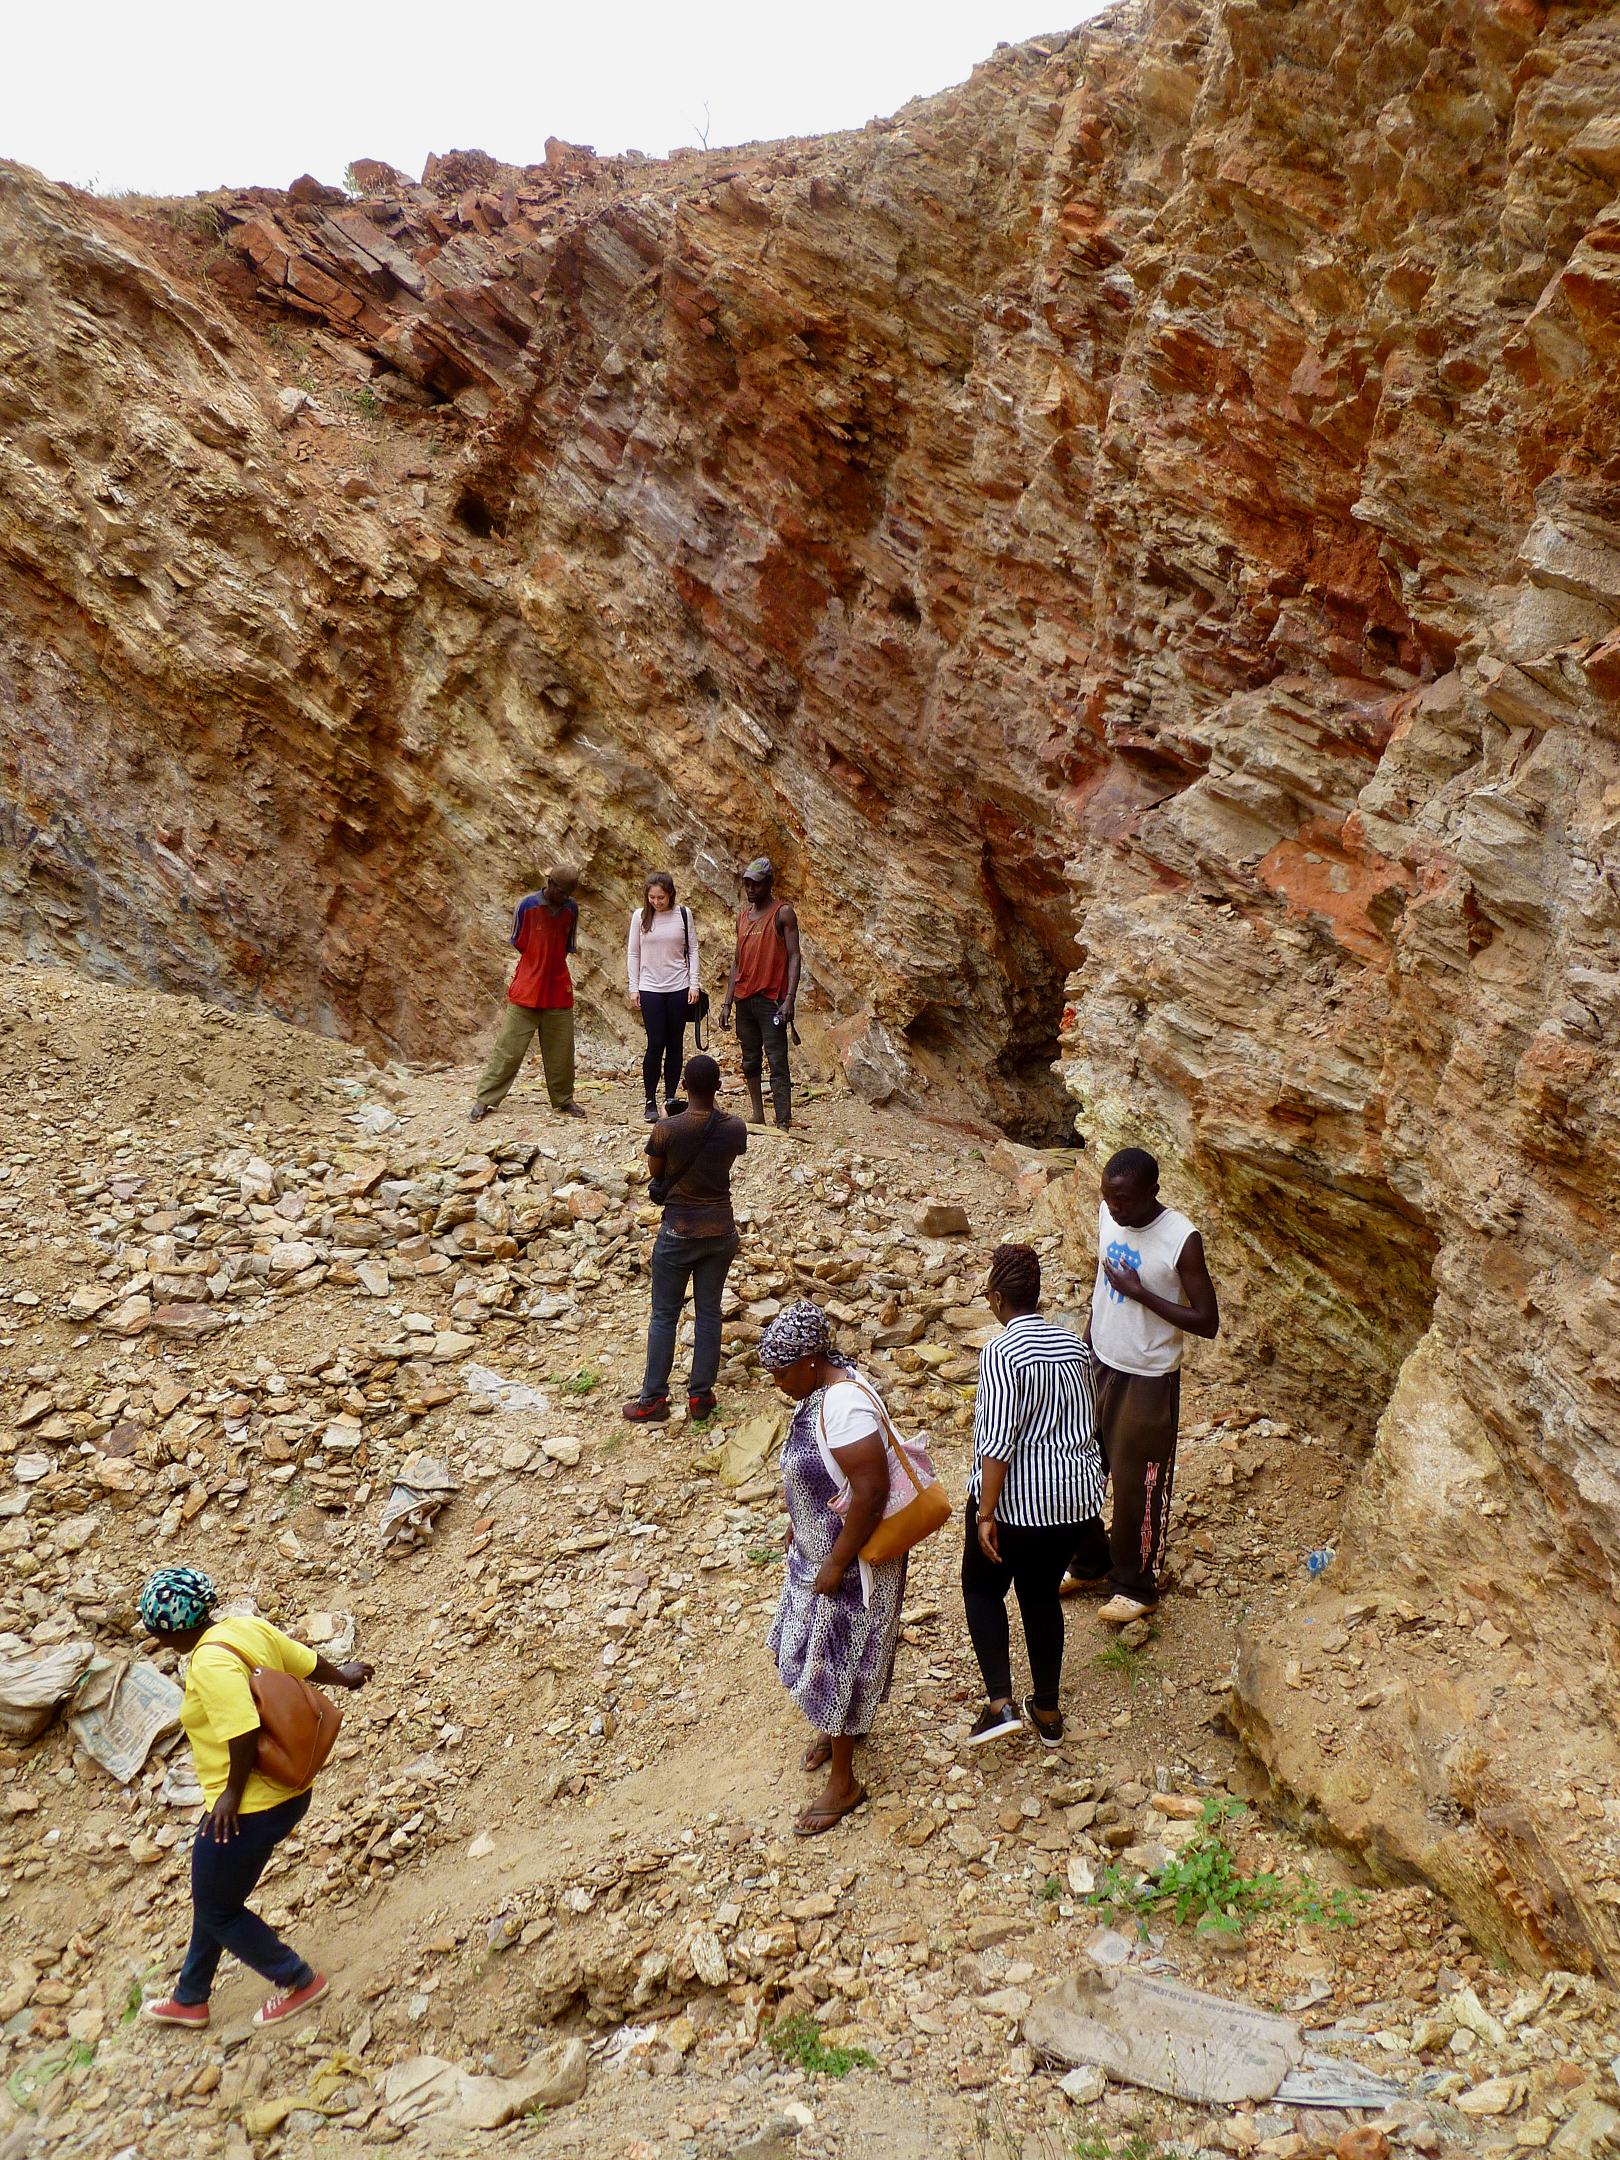 Exploring ASM site two with diggers, miners and gemmologists